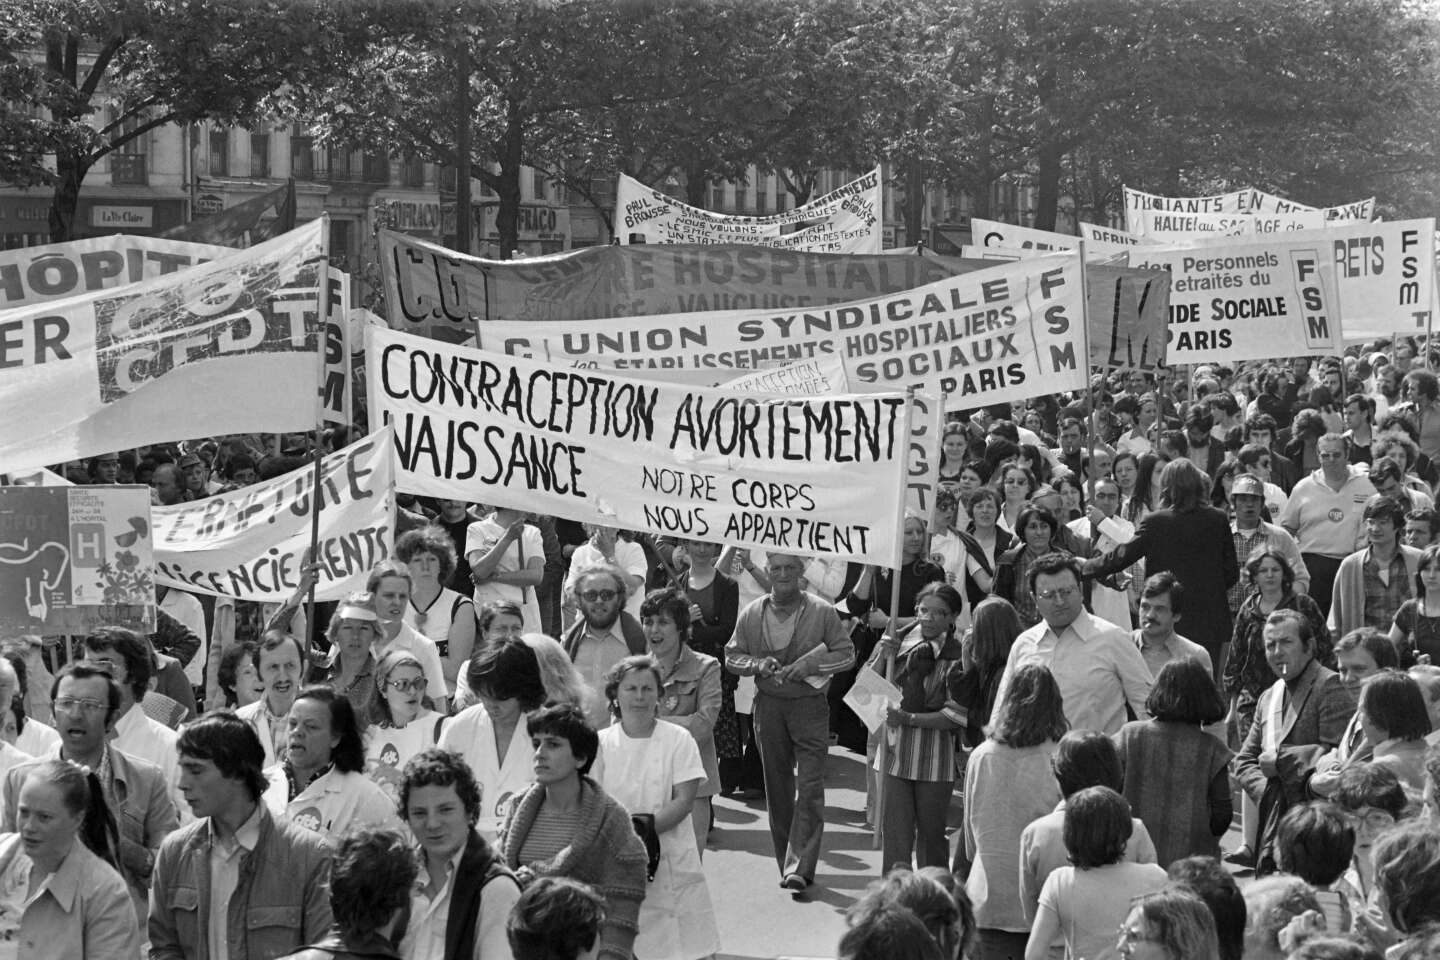 Claudine Monteil, an intact feminist commitment